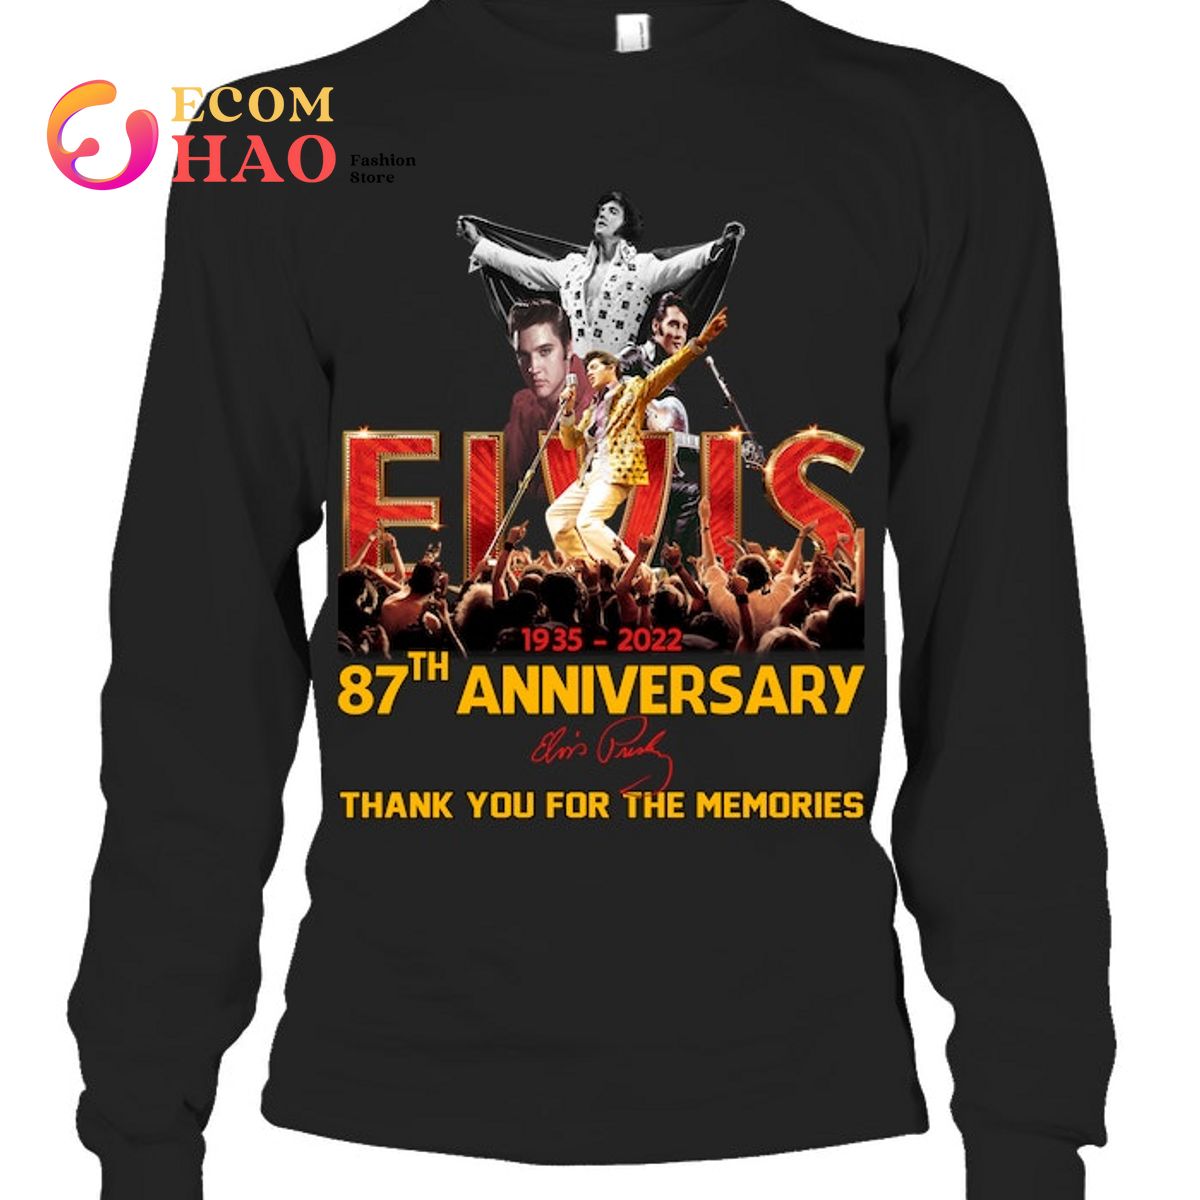 1935 - 2022 87th Anniversary Elvis Presley Thank You For The Memories T-Shirt